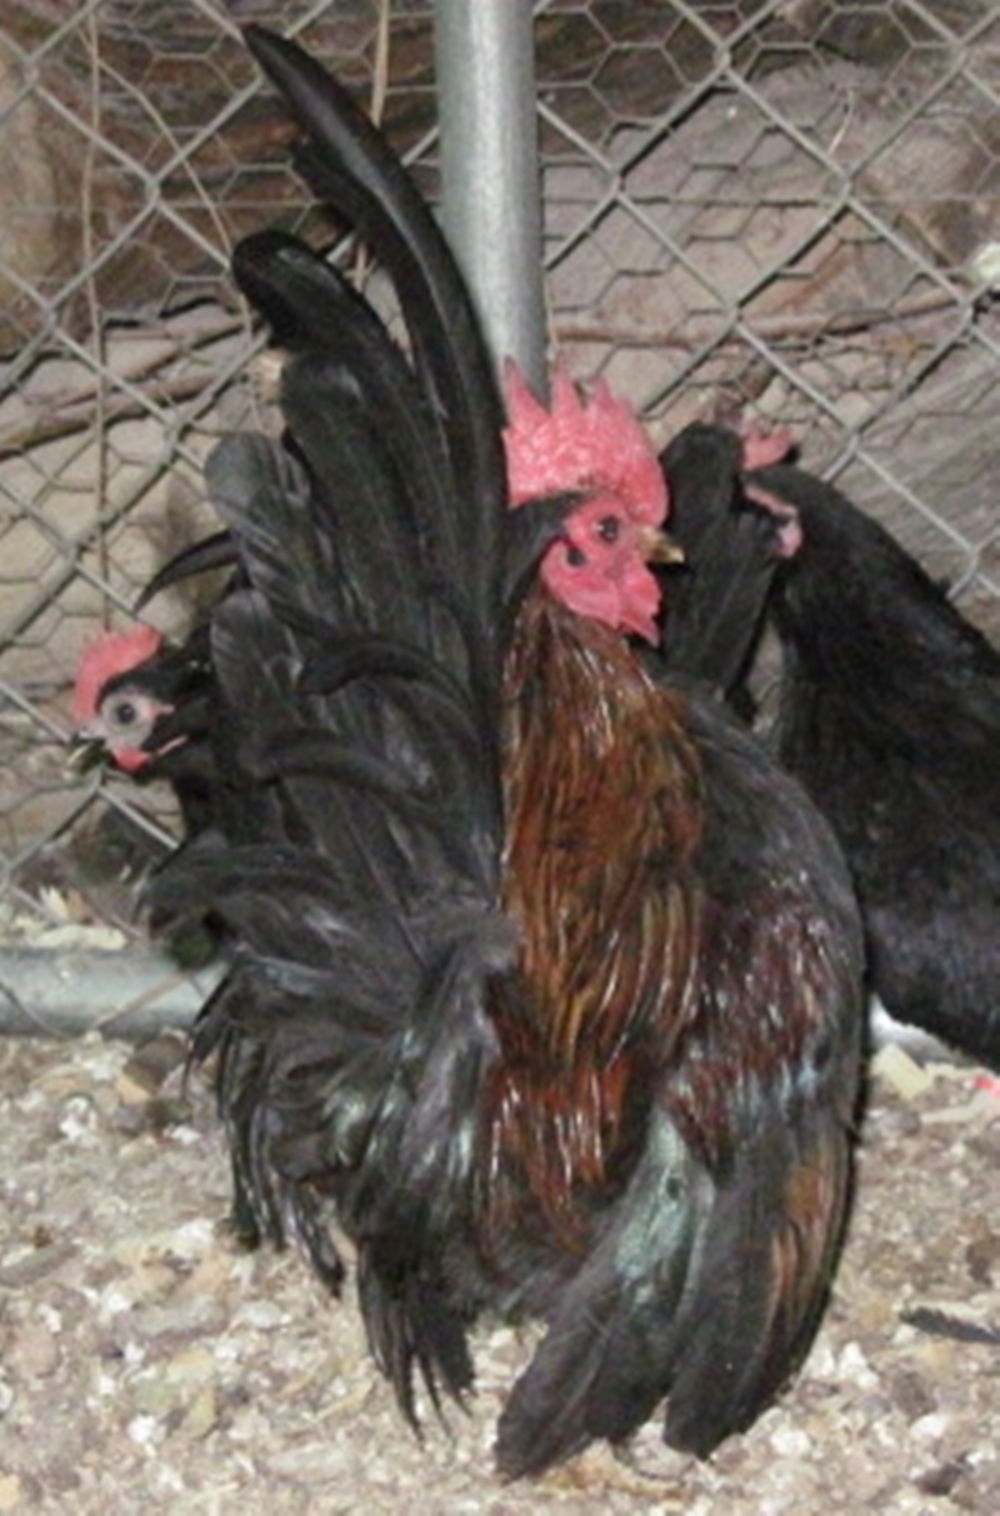 This old serama roo, we still are breeding with his own hens, he is a little bigger then we like to put in our main coop, we have him on the side with his own girls. We only got a few chicks from him last year, but his type warrants another try. Love that tail !!